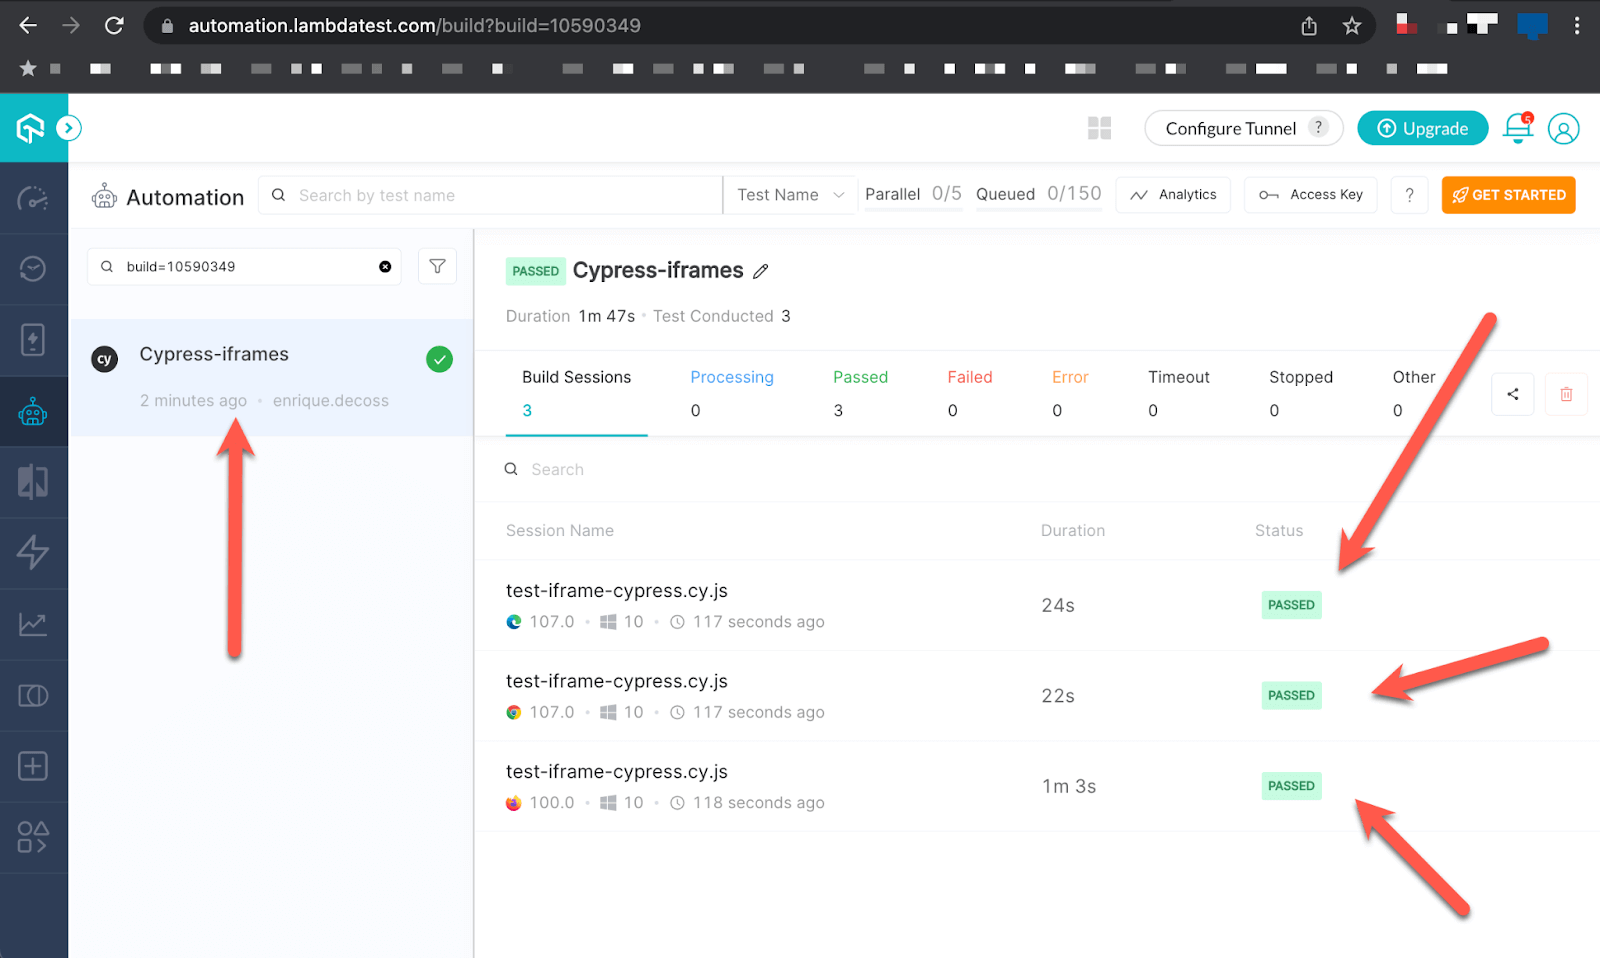 execution status from the LambdaTest Automation Dashboard